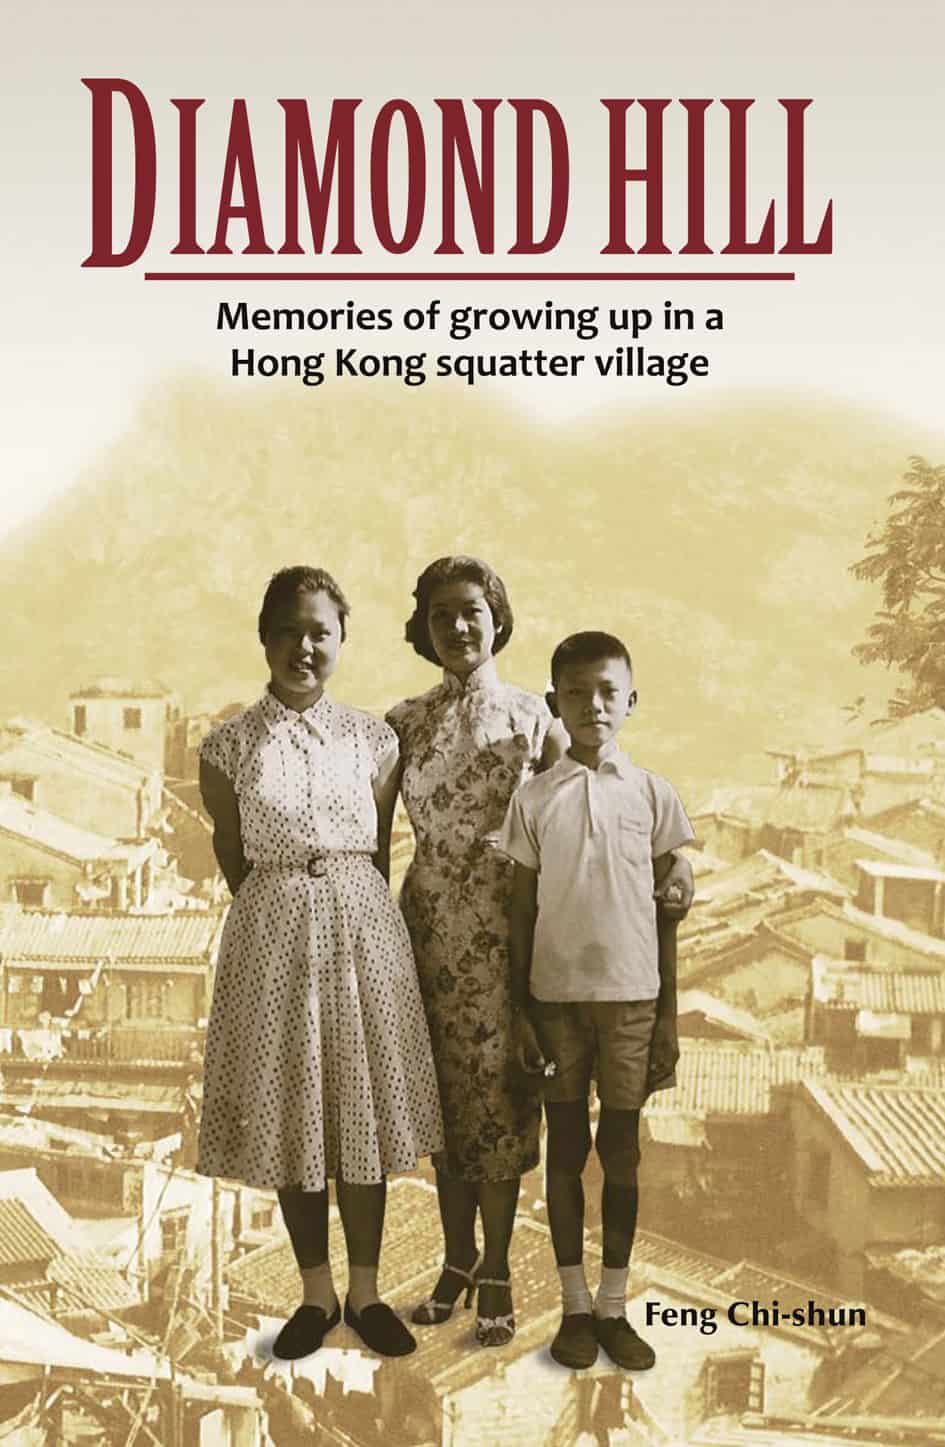 Diamond Hill: Memories of Growing Up in a Hong Kong Squatter Village